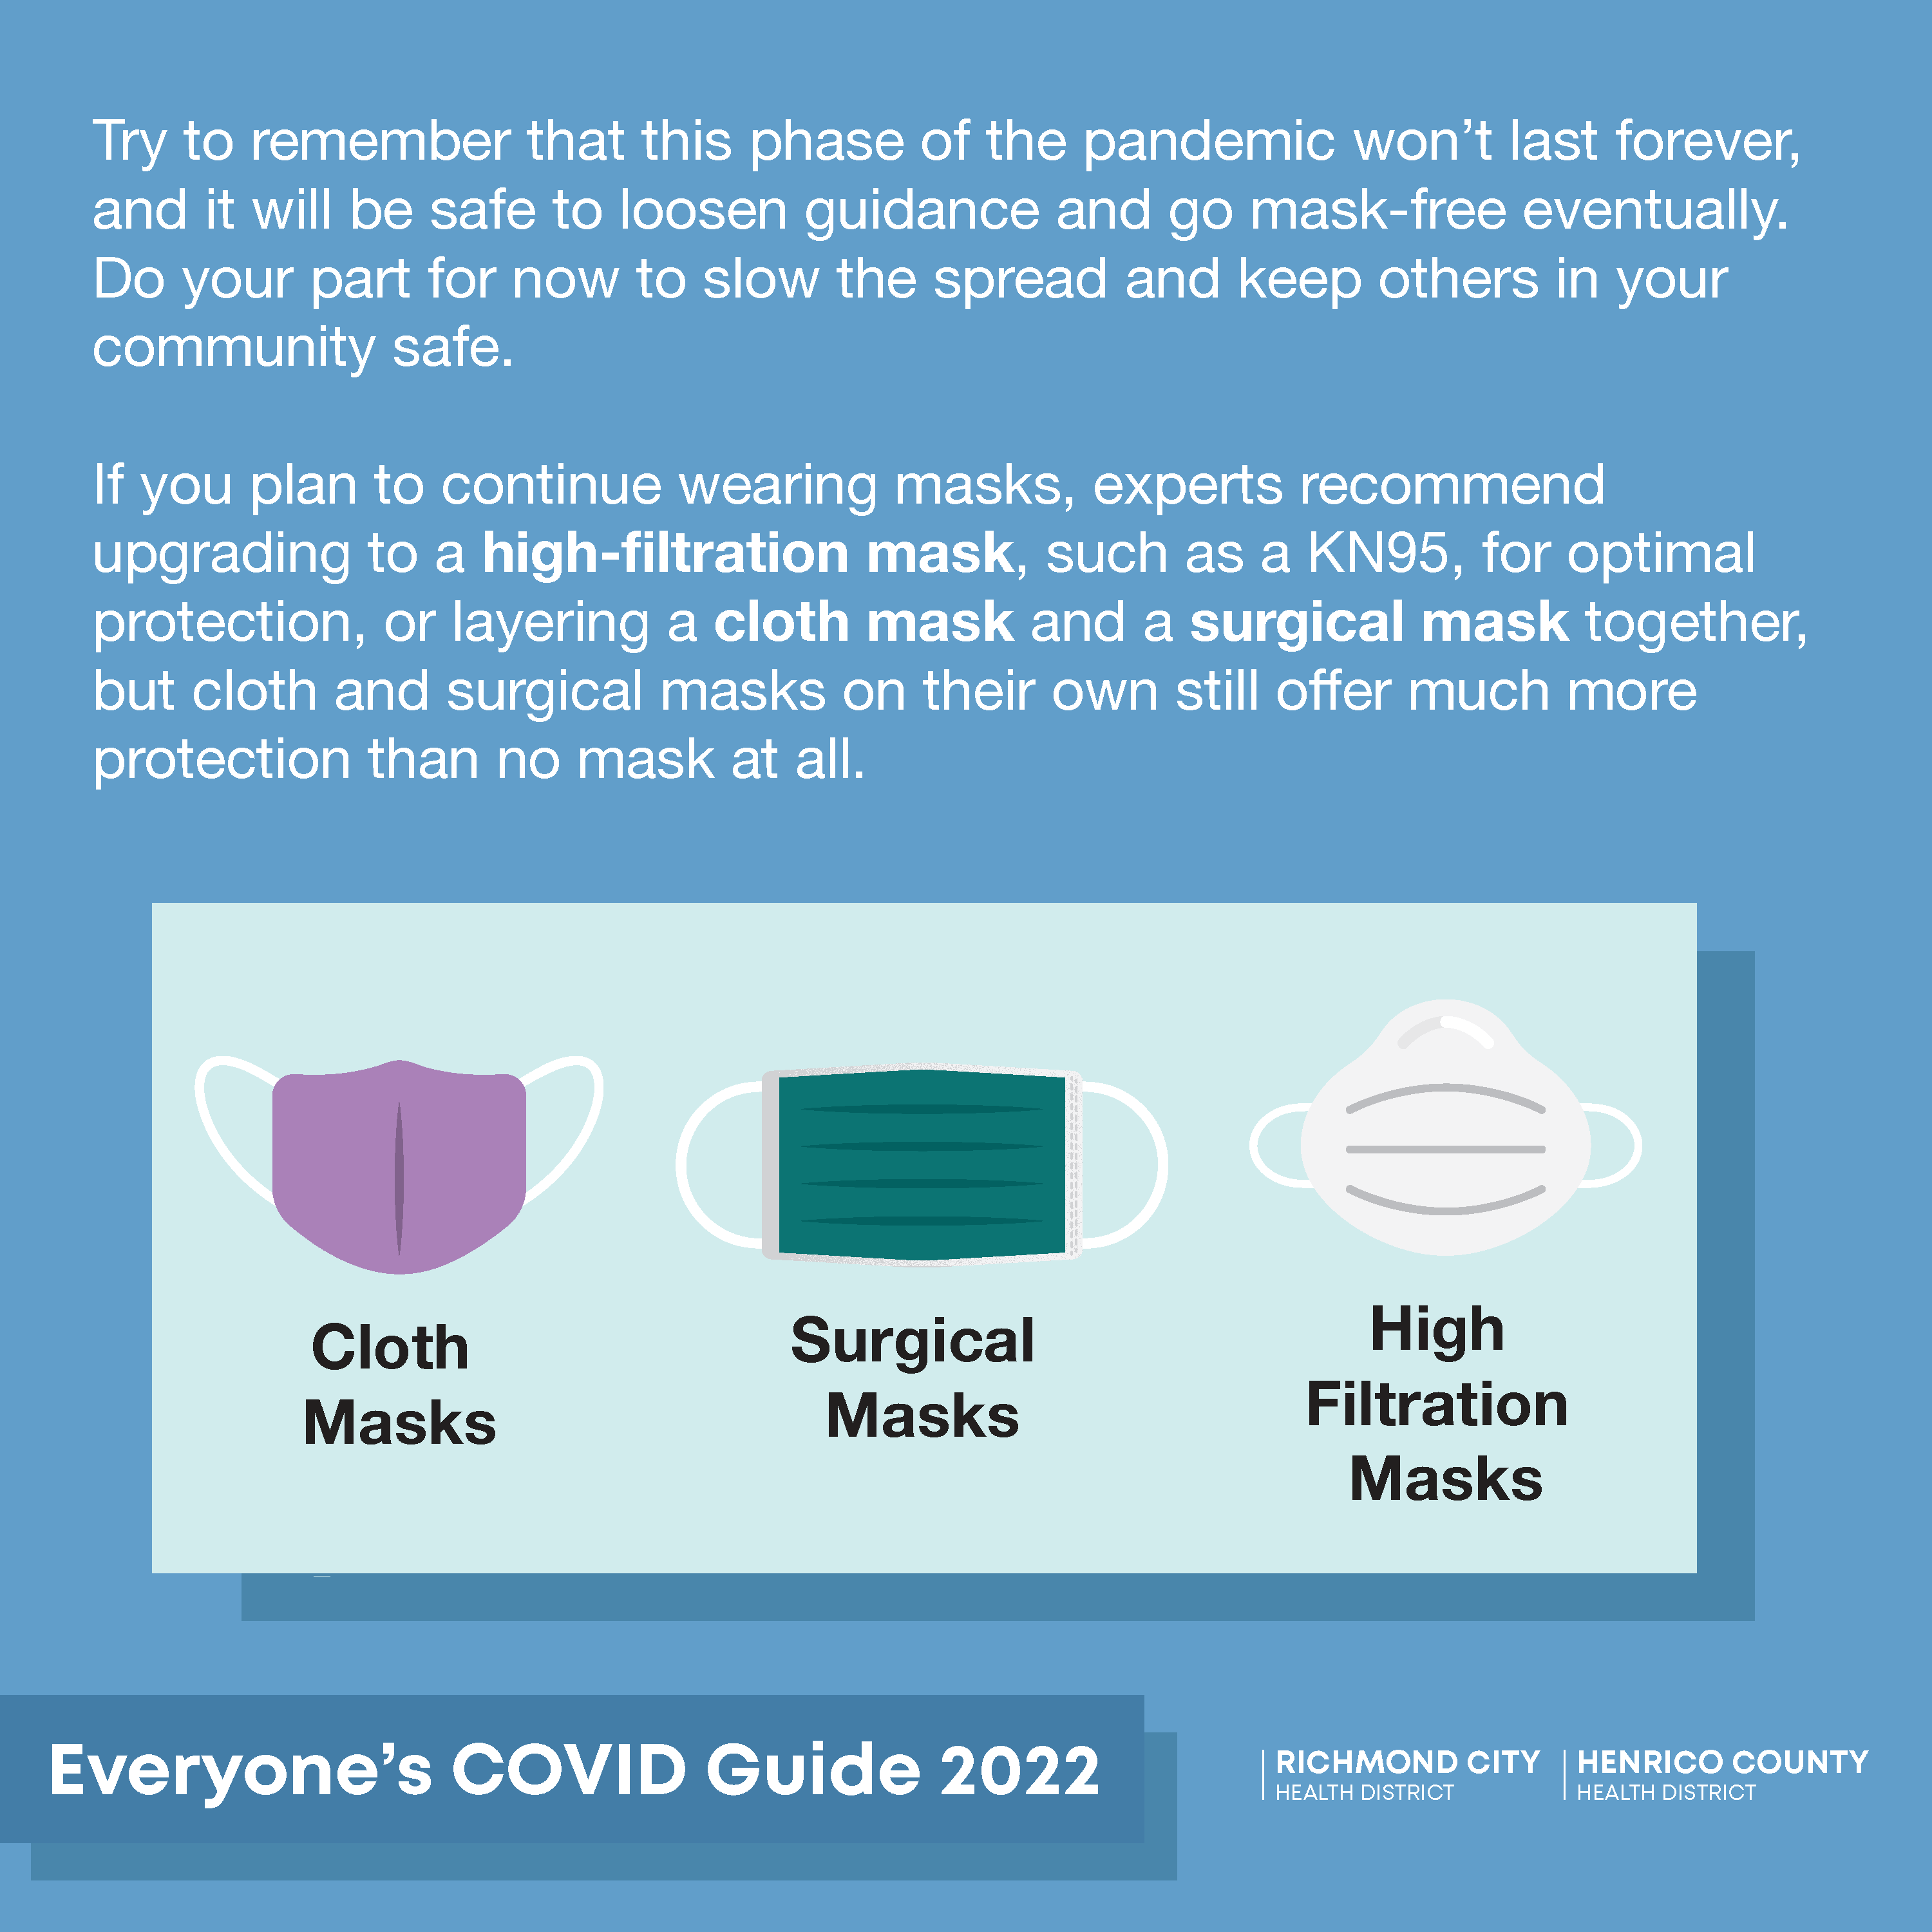 Info about the importance using masks to help prevent the spread of COVID-19